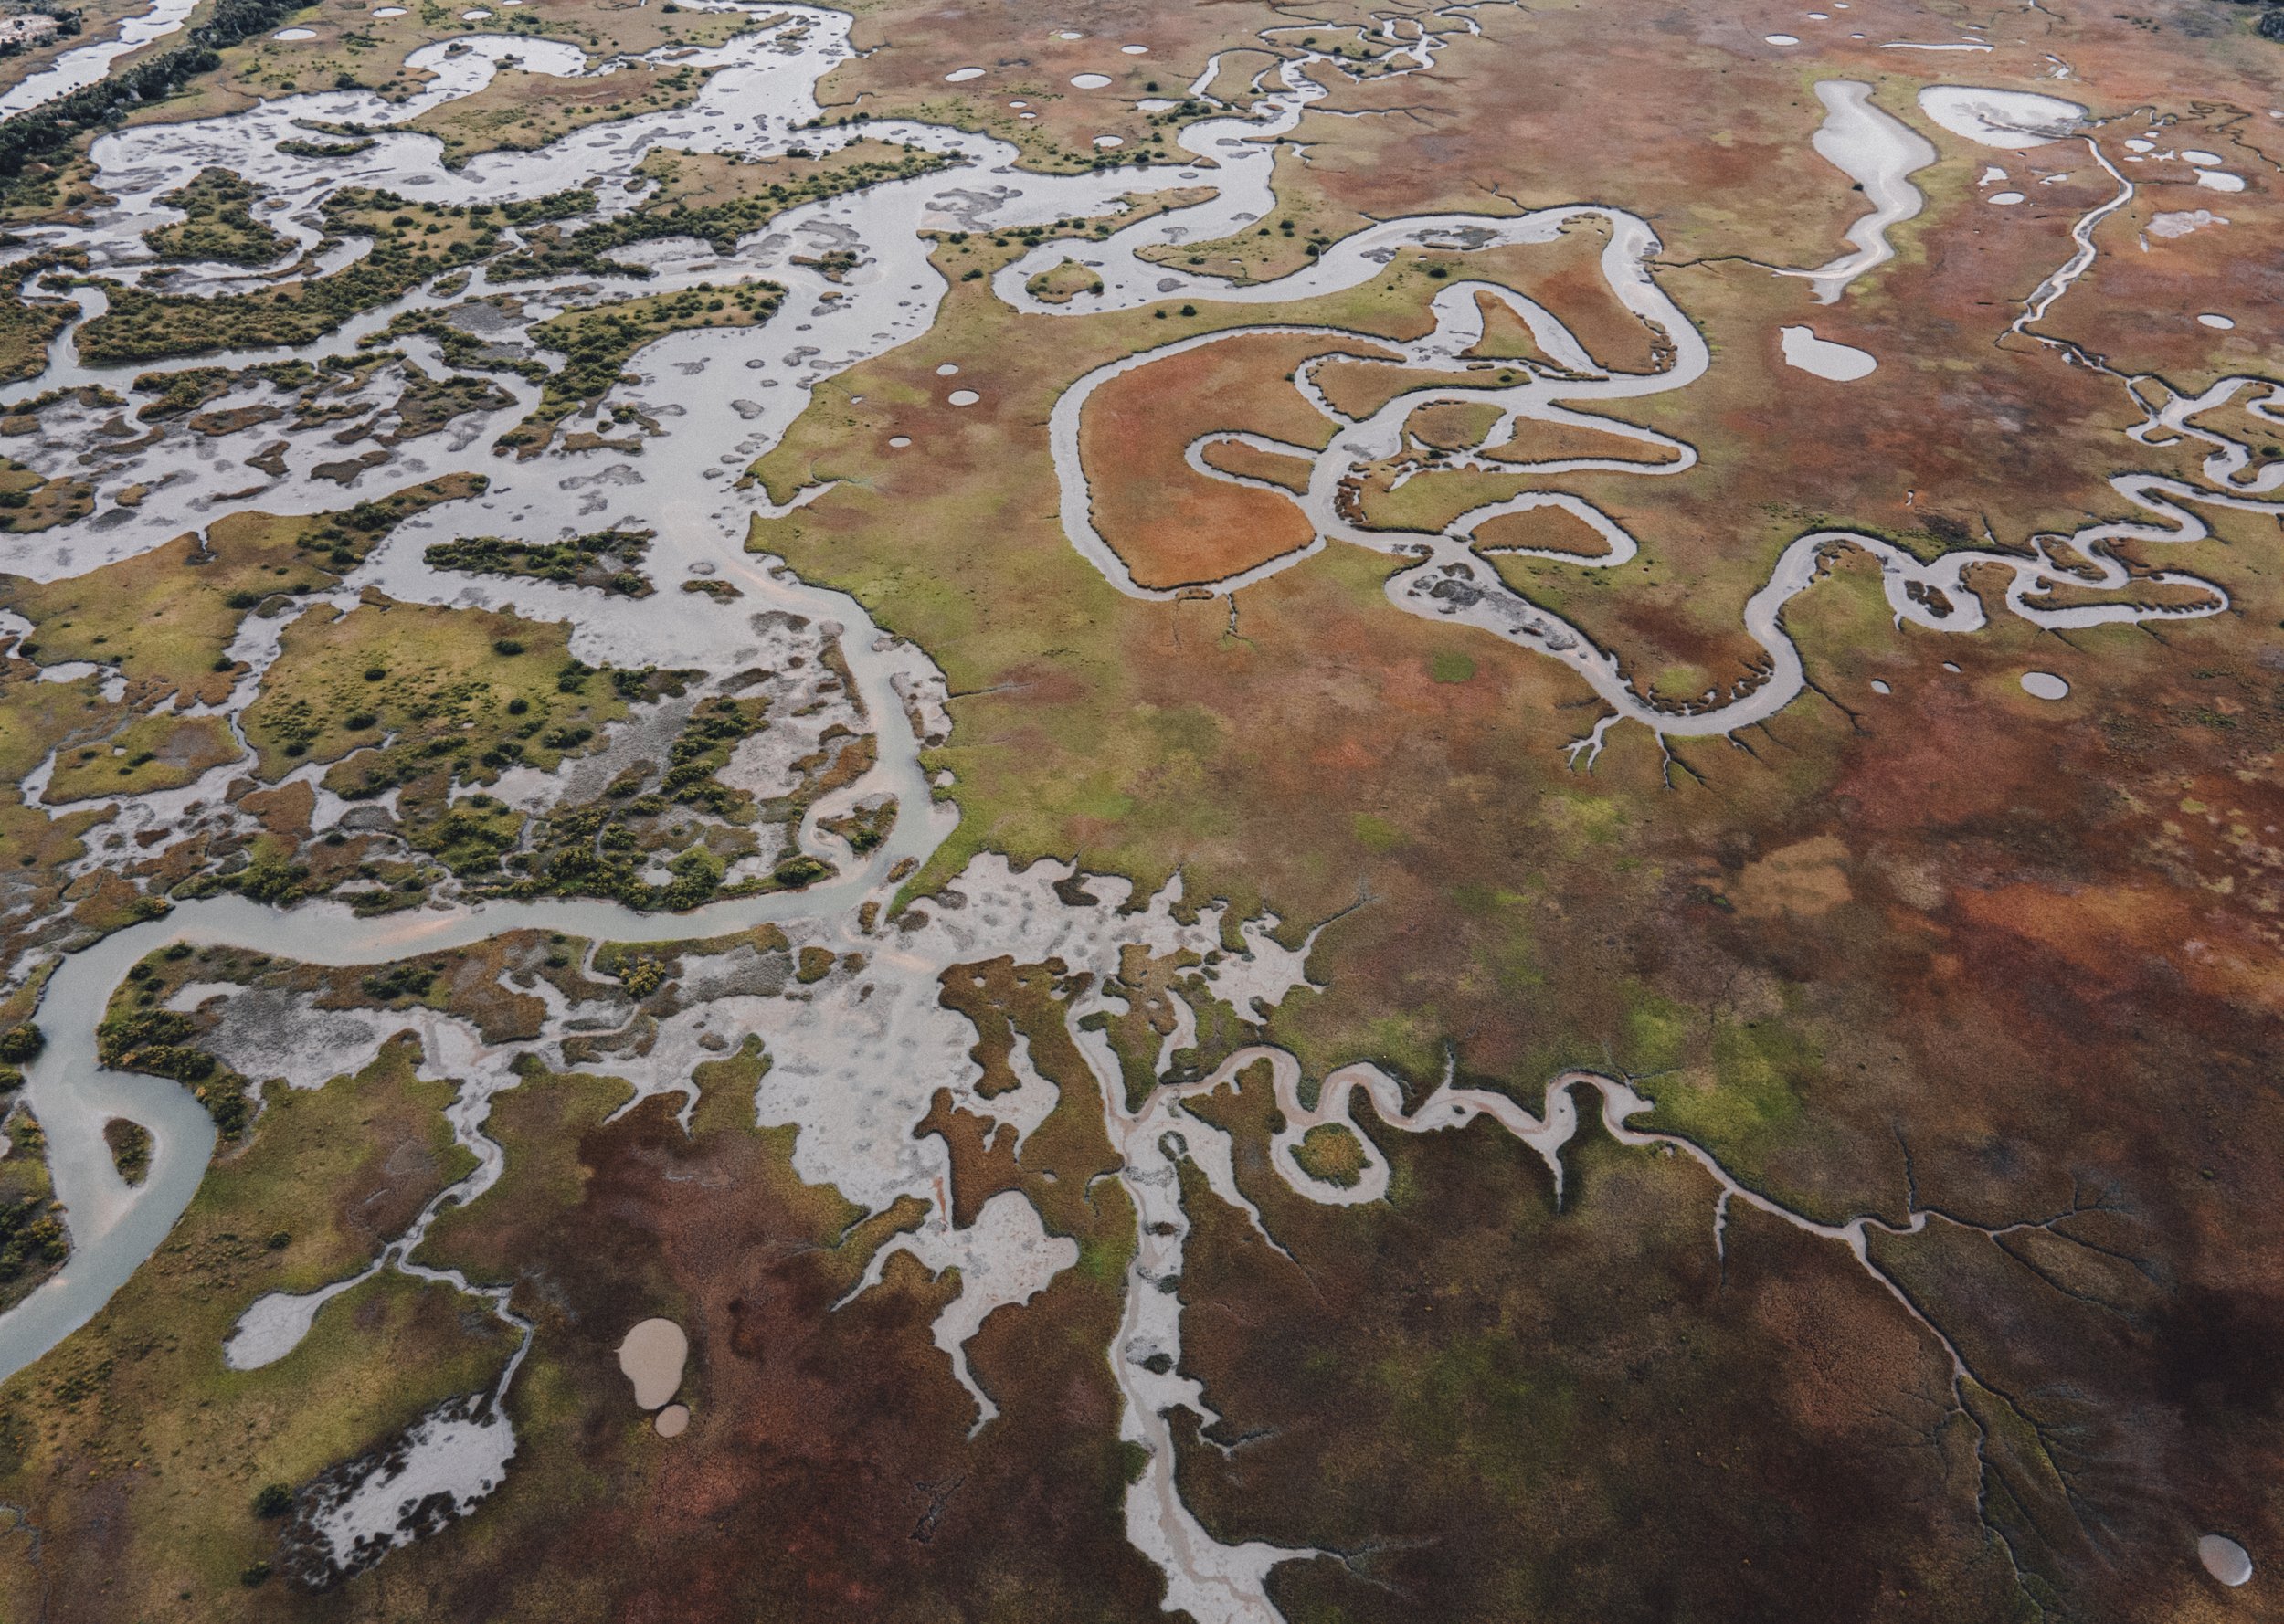  Florida has these crazy river systems you can only see from the sky. Another reason to have a drone.  